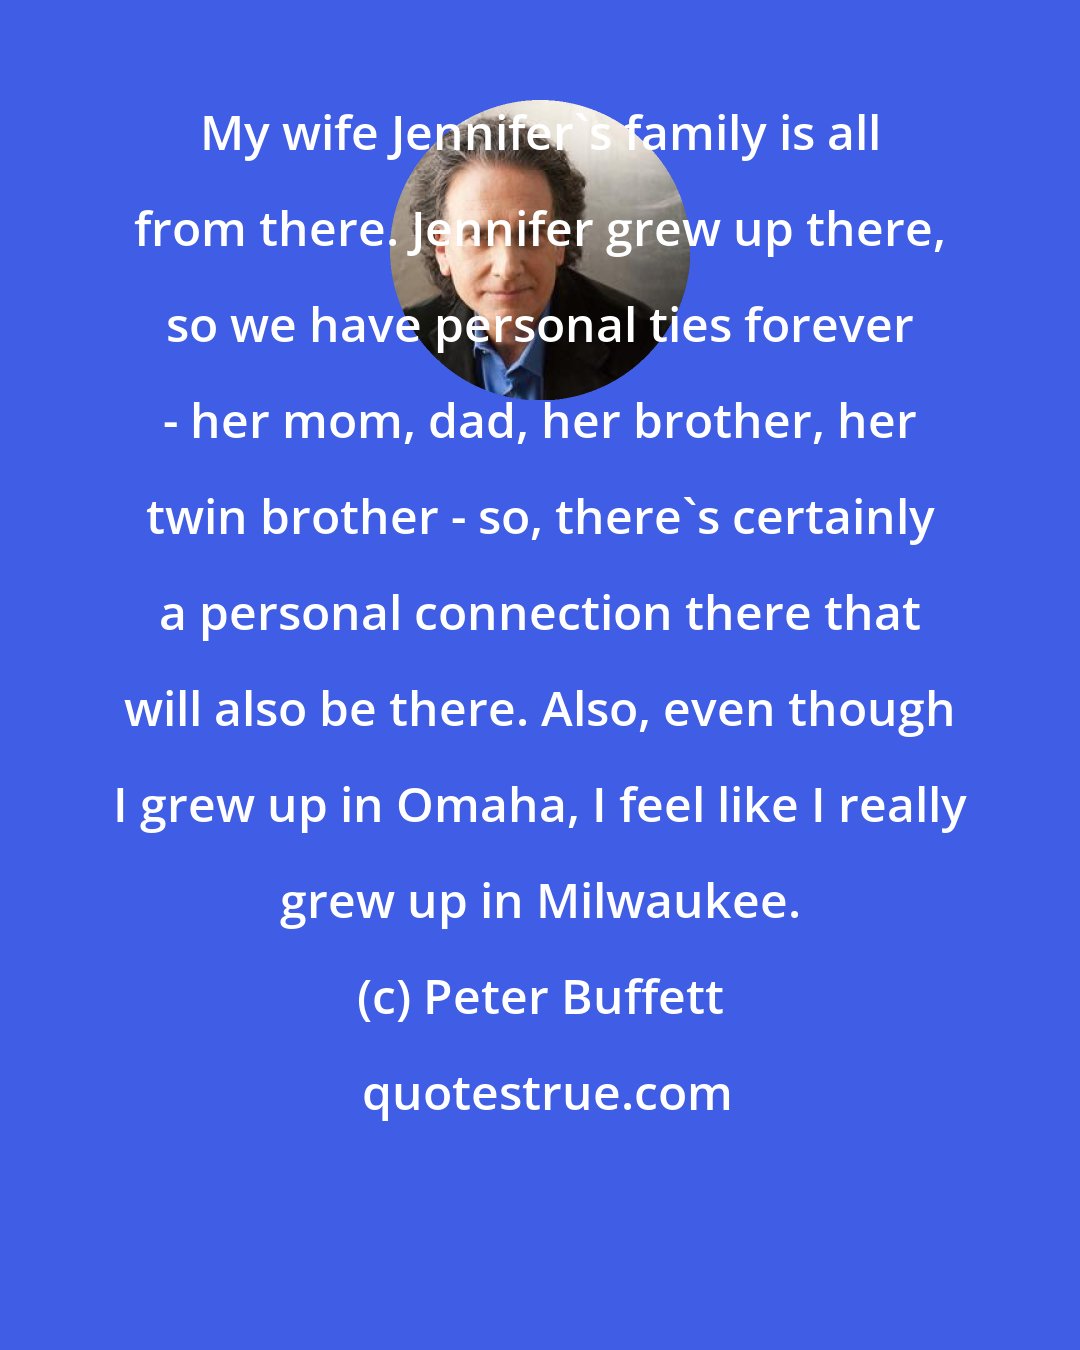 Peter Buffett: My wife Jennifer's family is all from there. Jennifer grew up there, so we have personal ties forever - her mom, dad, her brother, her twin brother - so, there's certainly a personal connection there that will also be there. Also, even though I grew up in Omaha, I feel like I really grew up in Milwaukee.